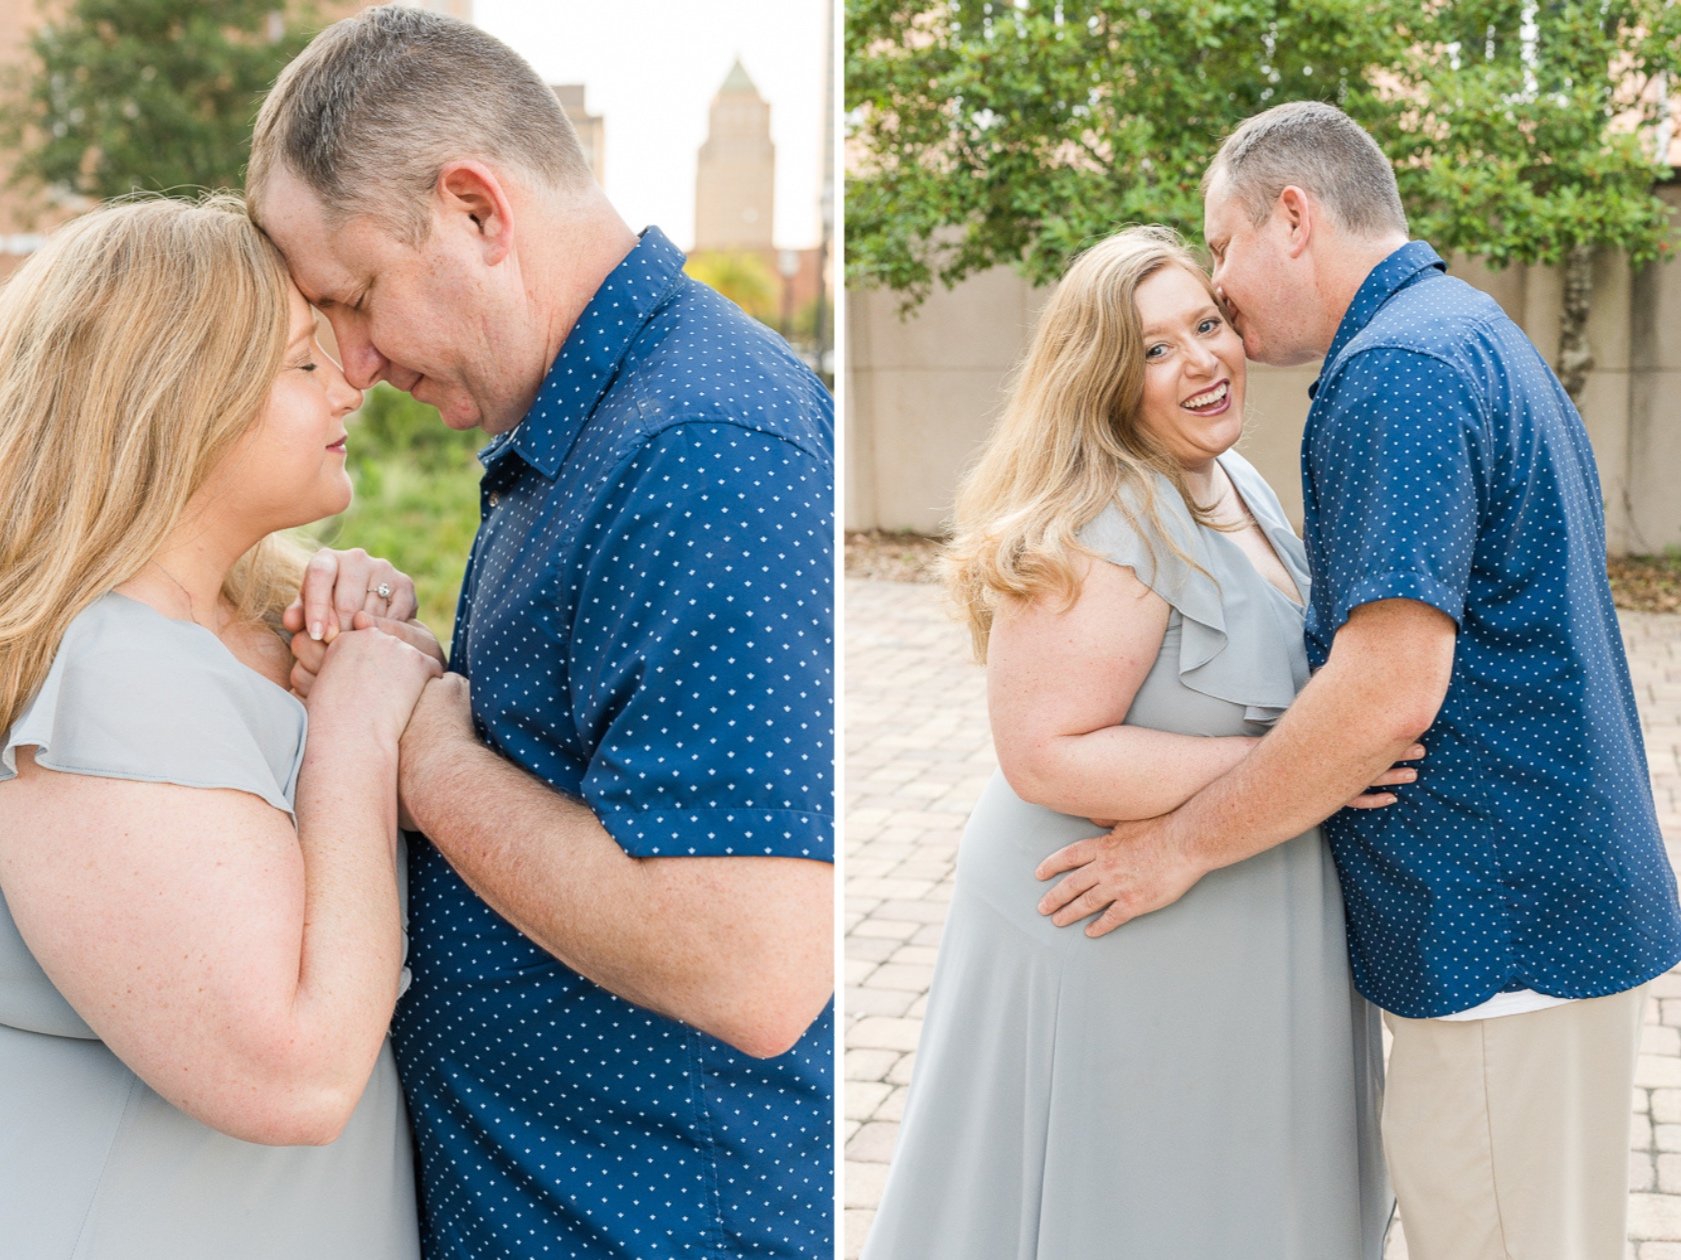 Downtown Mobile Engagement Session in the Summer with overcast skies photographed by Kristen Marcus Photography | Alabama Wedding Photographer